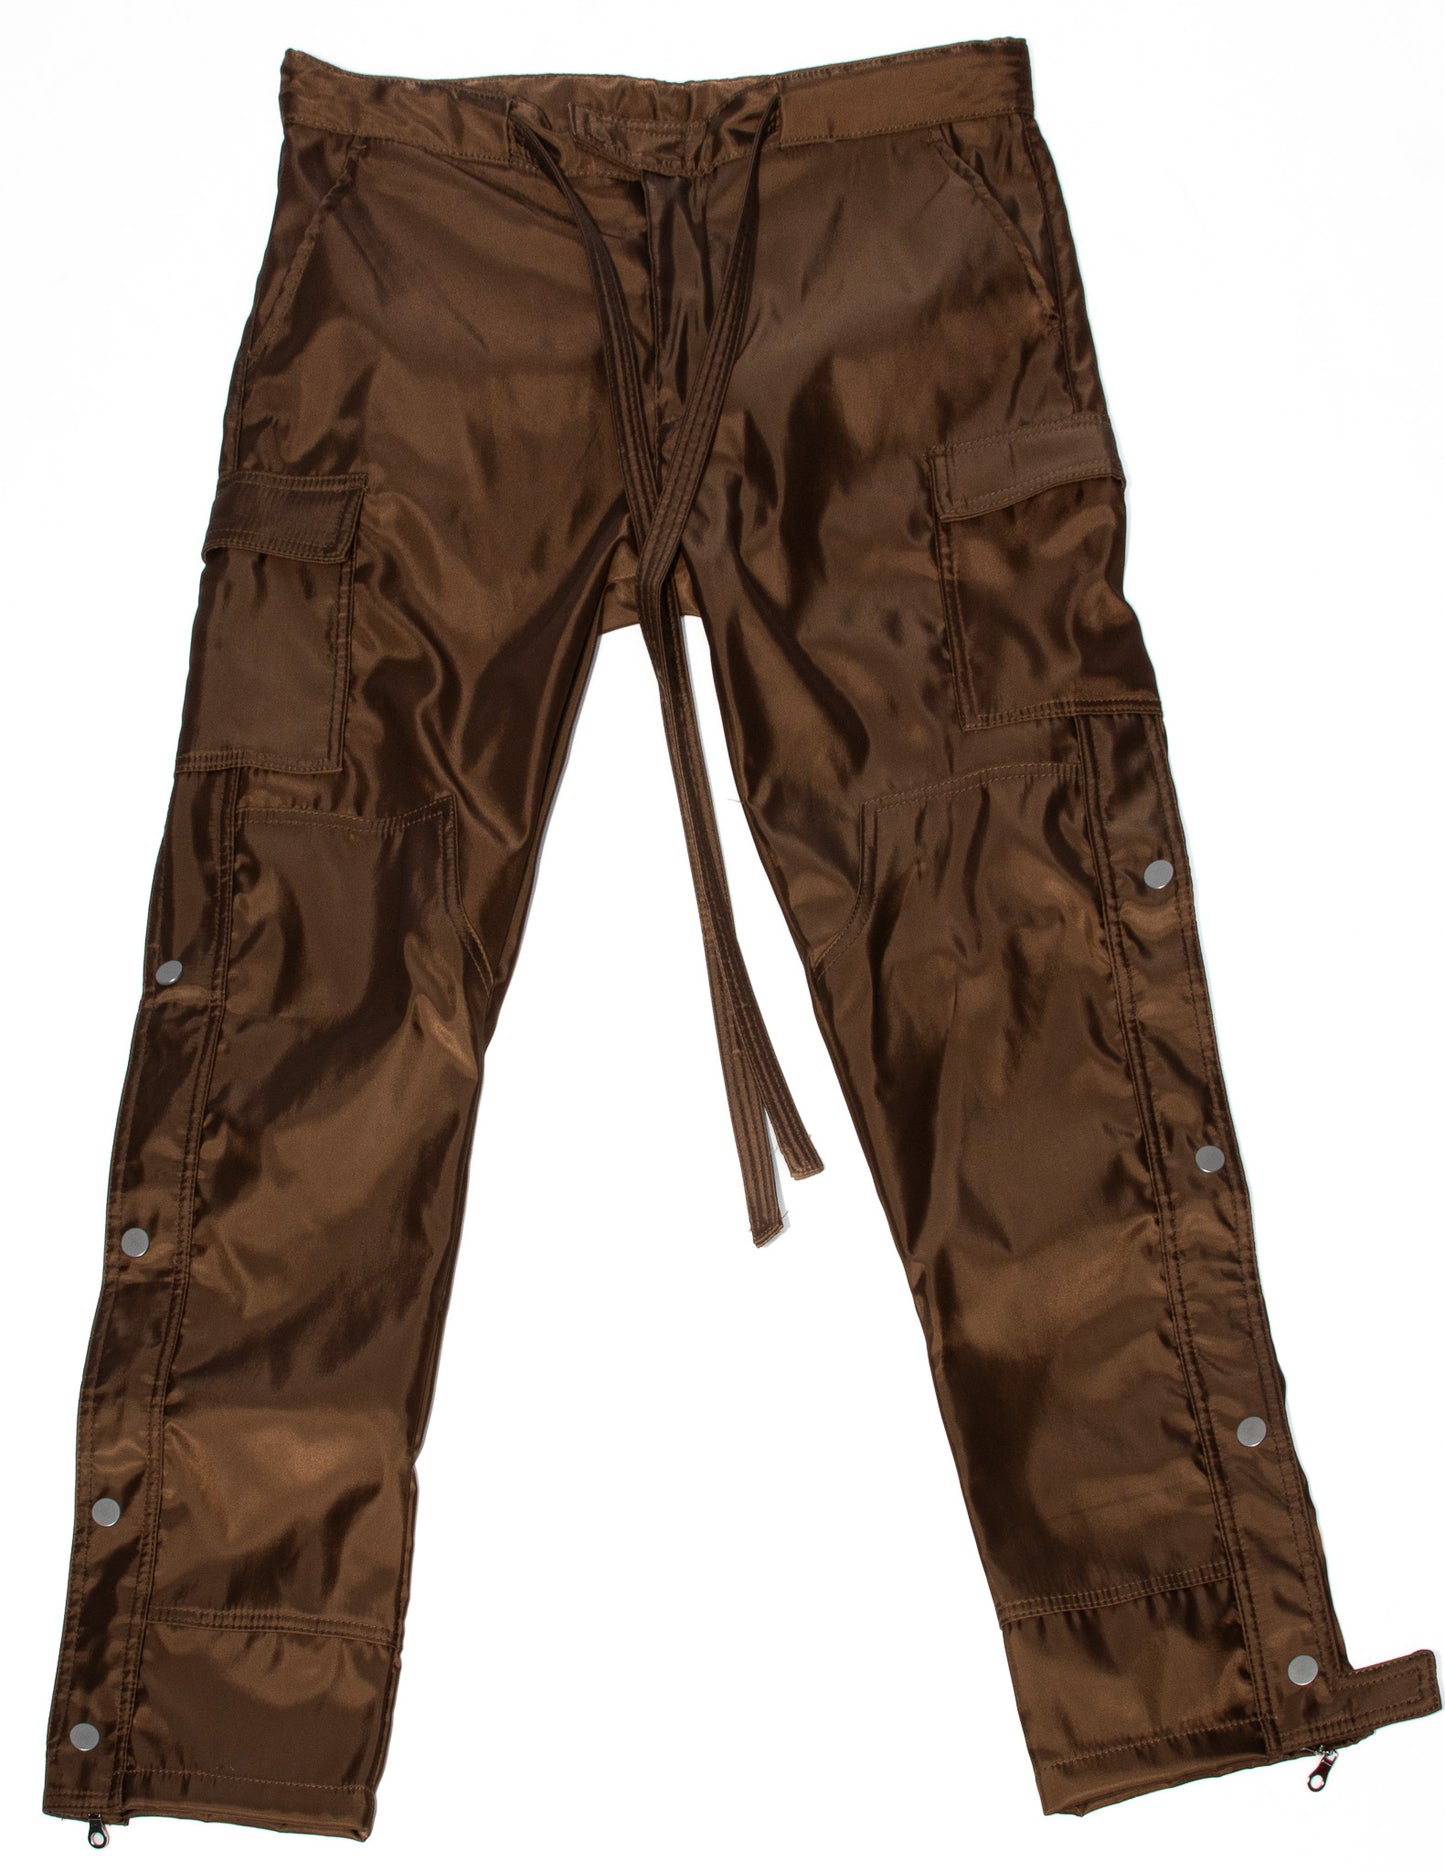 Brown Cargo Pants with Dusty Pink Skull embroidery